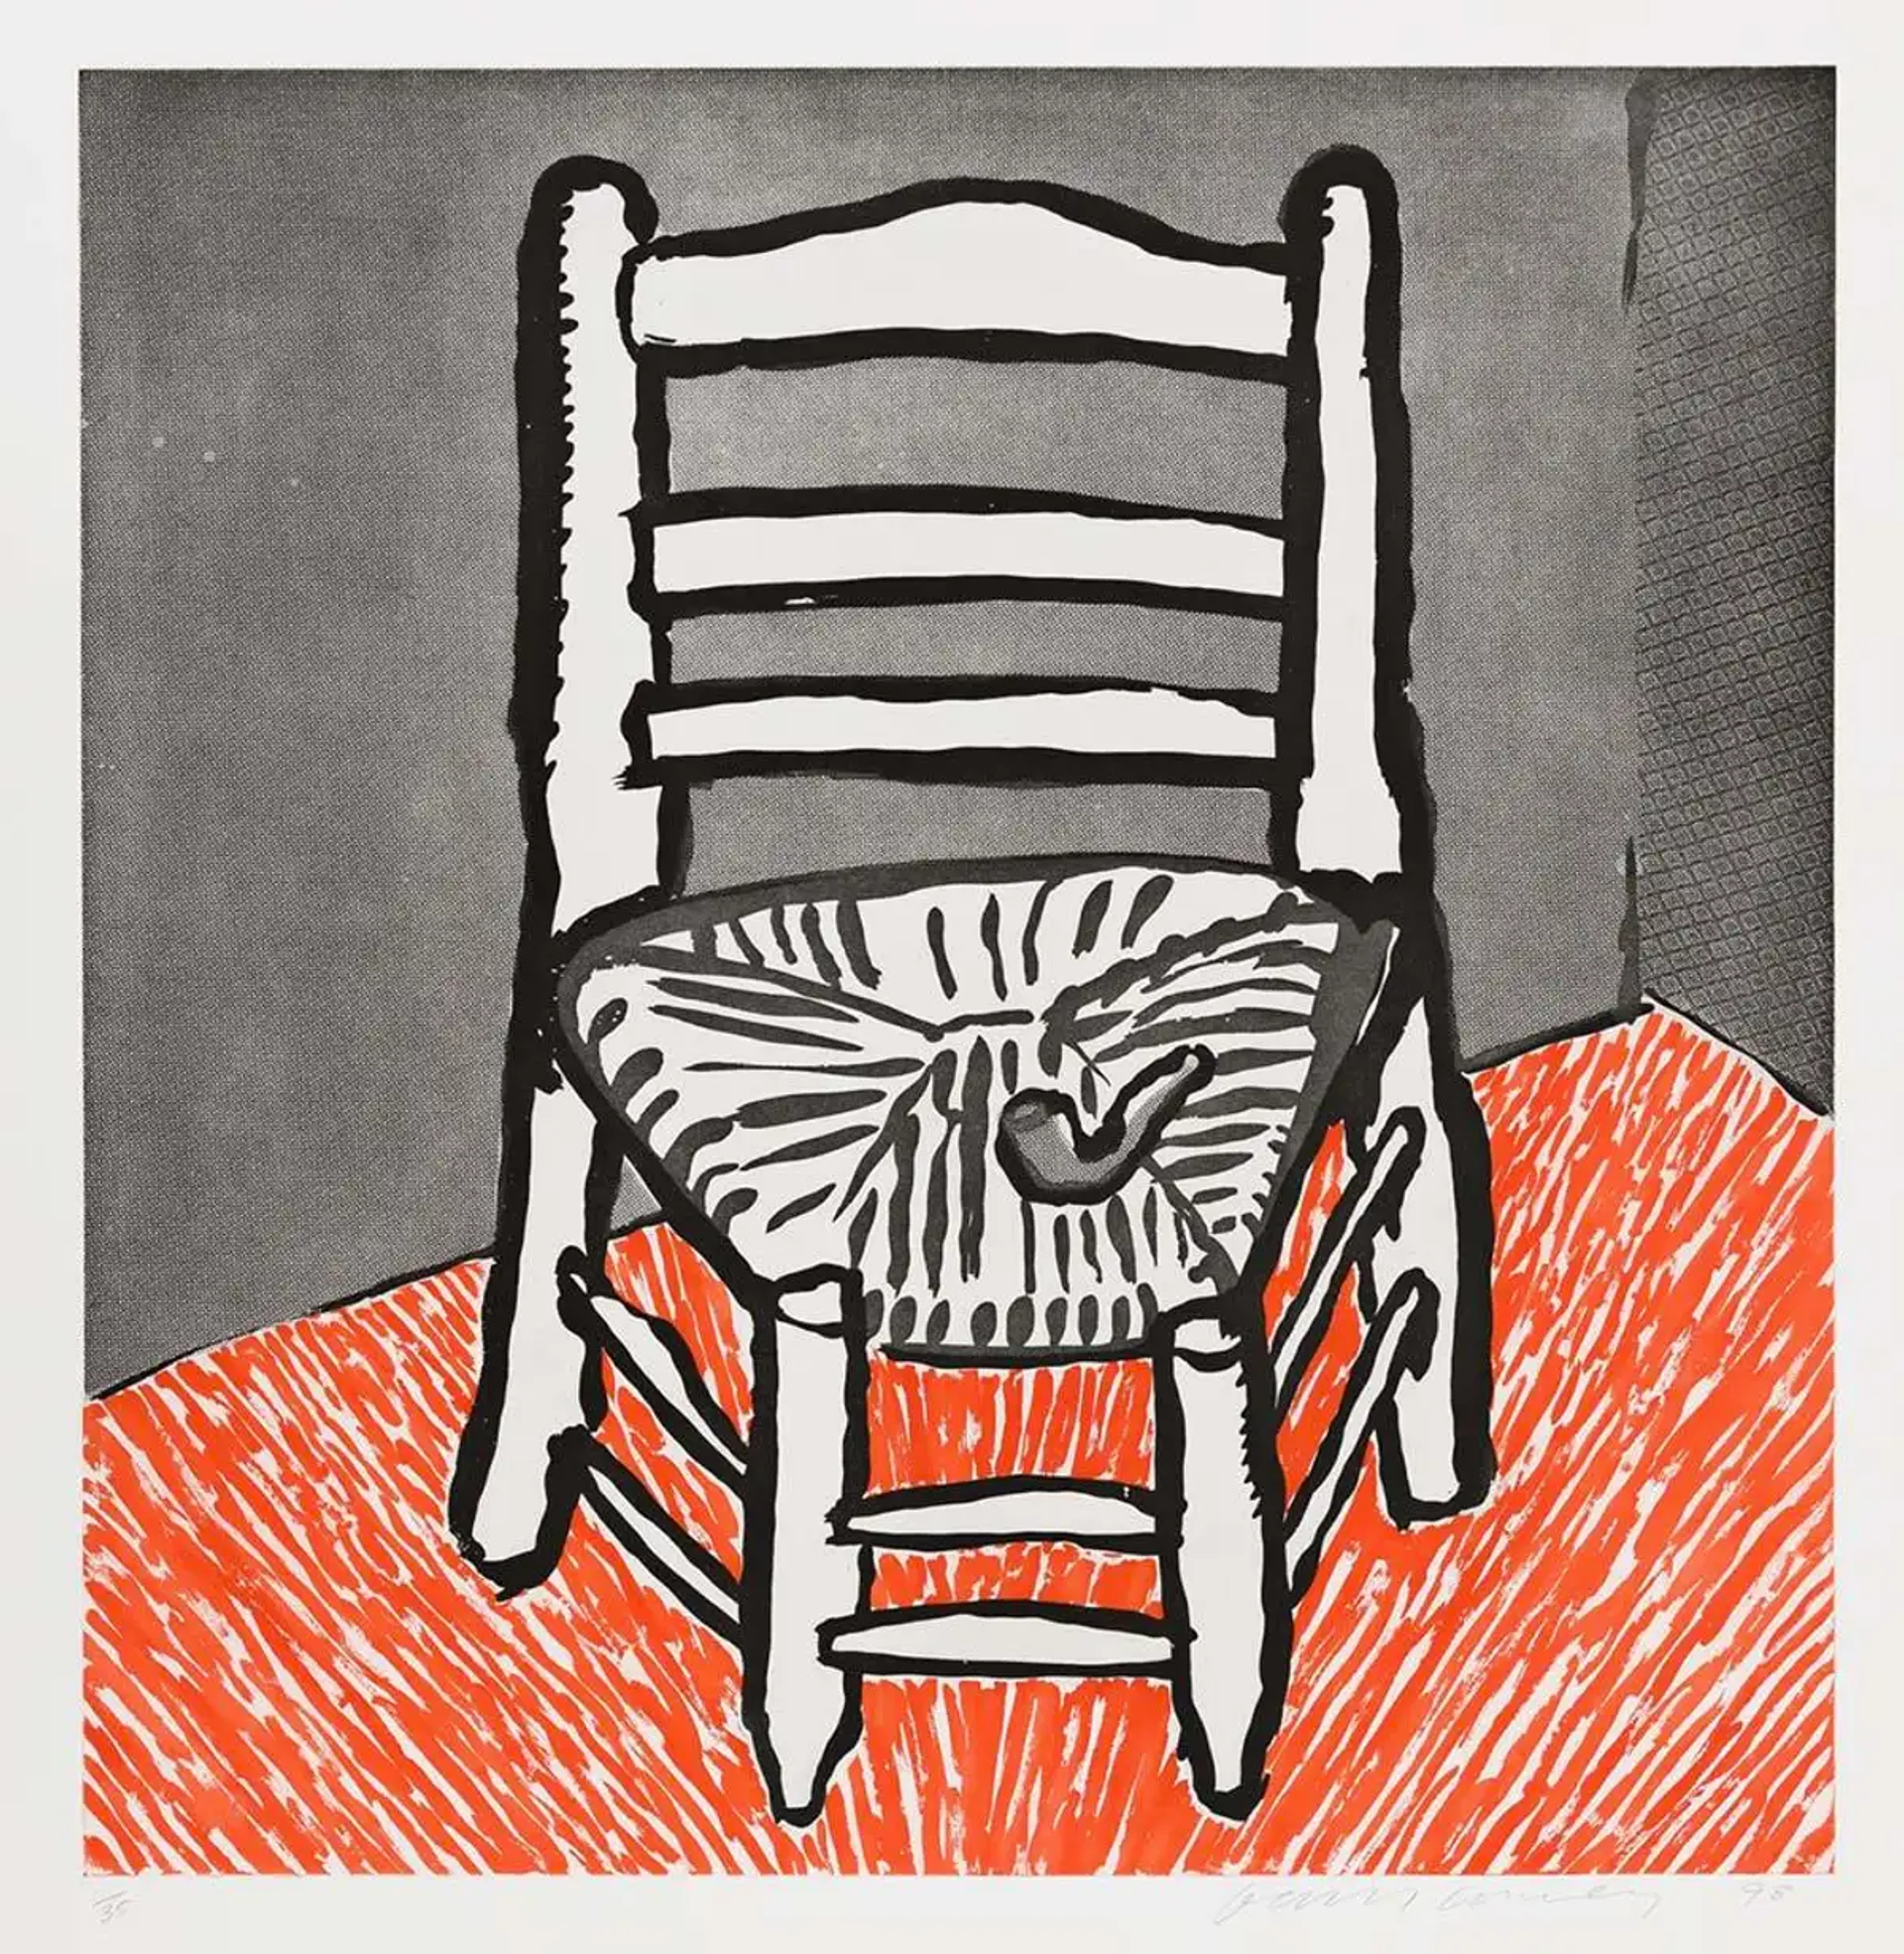 Hockney takes the famous painting of a chair by van Gogh as his starting point for an etching. van Gogh’s work is notable for its realism and soft palette, however in Hockney’s version the chair is given an almost cartoon or Pop Art treatment, its wooden frame outlined in thick black lines which contrast with the light wash of ink behind it. Hockney has taken the original chair and positioned it in a tight corner of a room that is bare except for its bright red patterned carpet. It remains recognisable as van Gogh’s chair however, thanks to the pipe that rests on the wicker seat, an obvious homage to the Dutch artist.